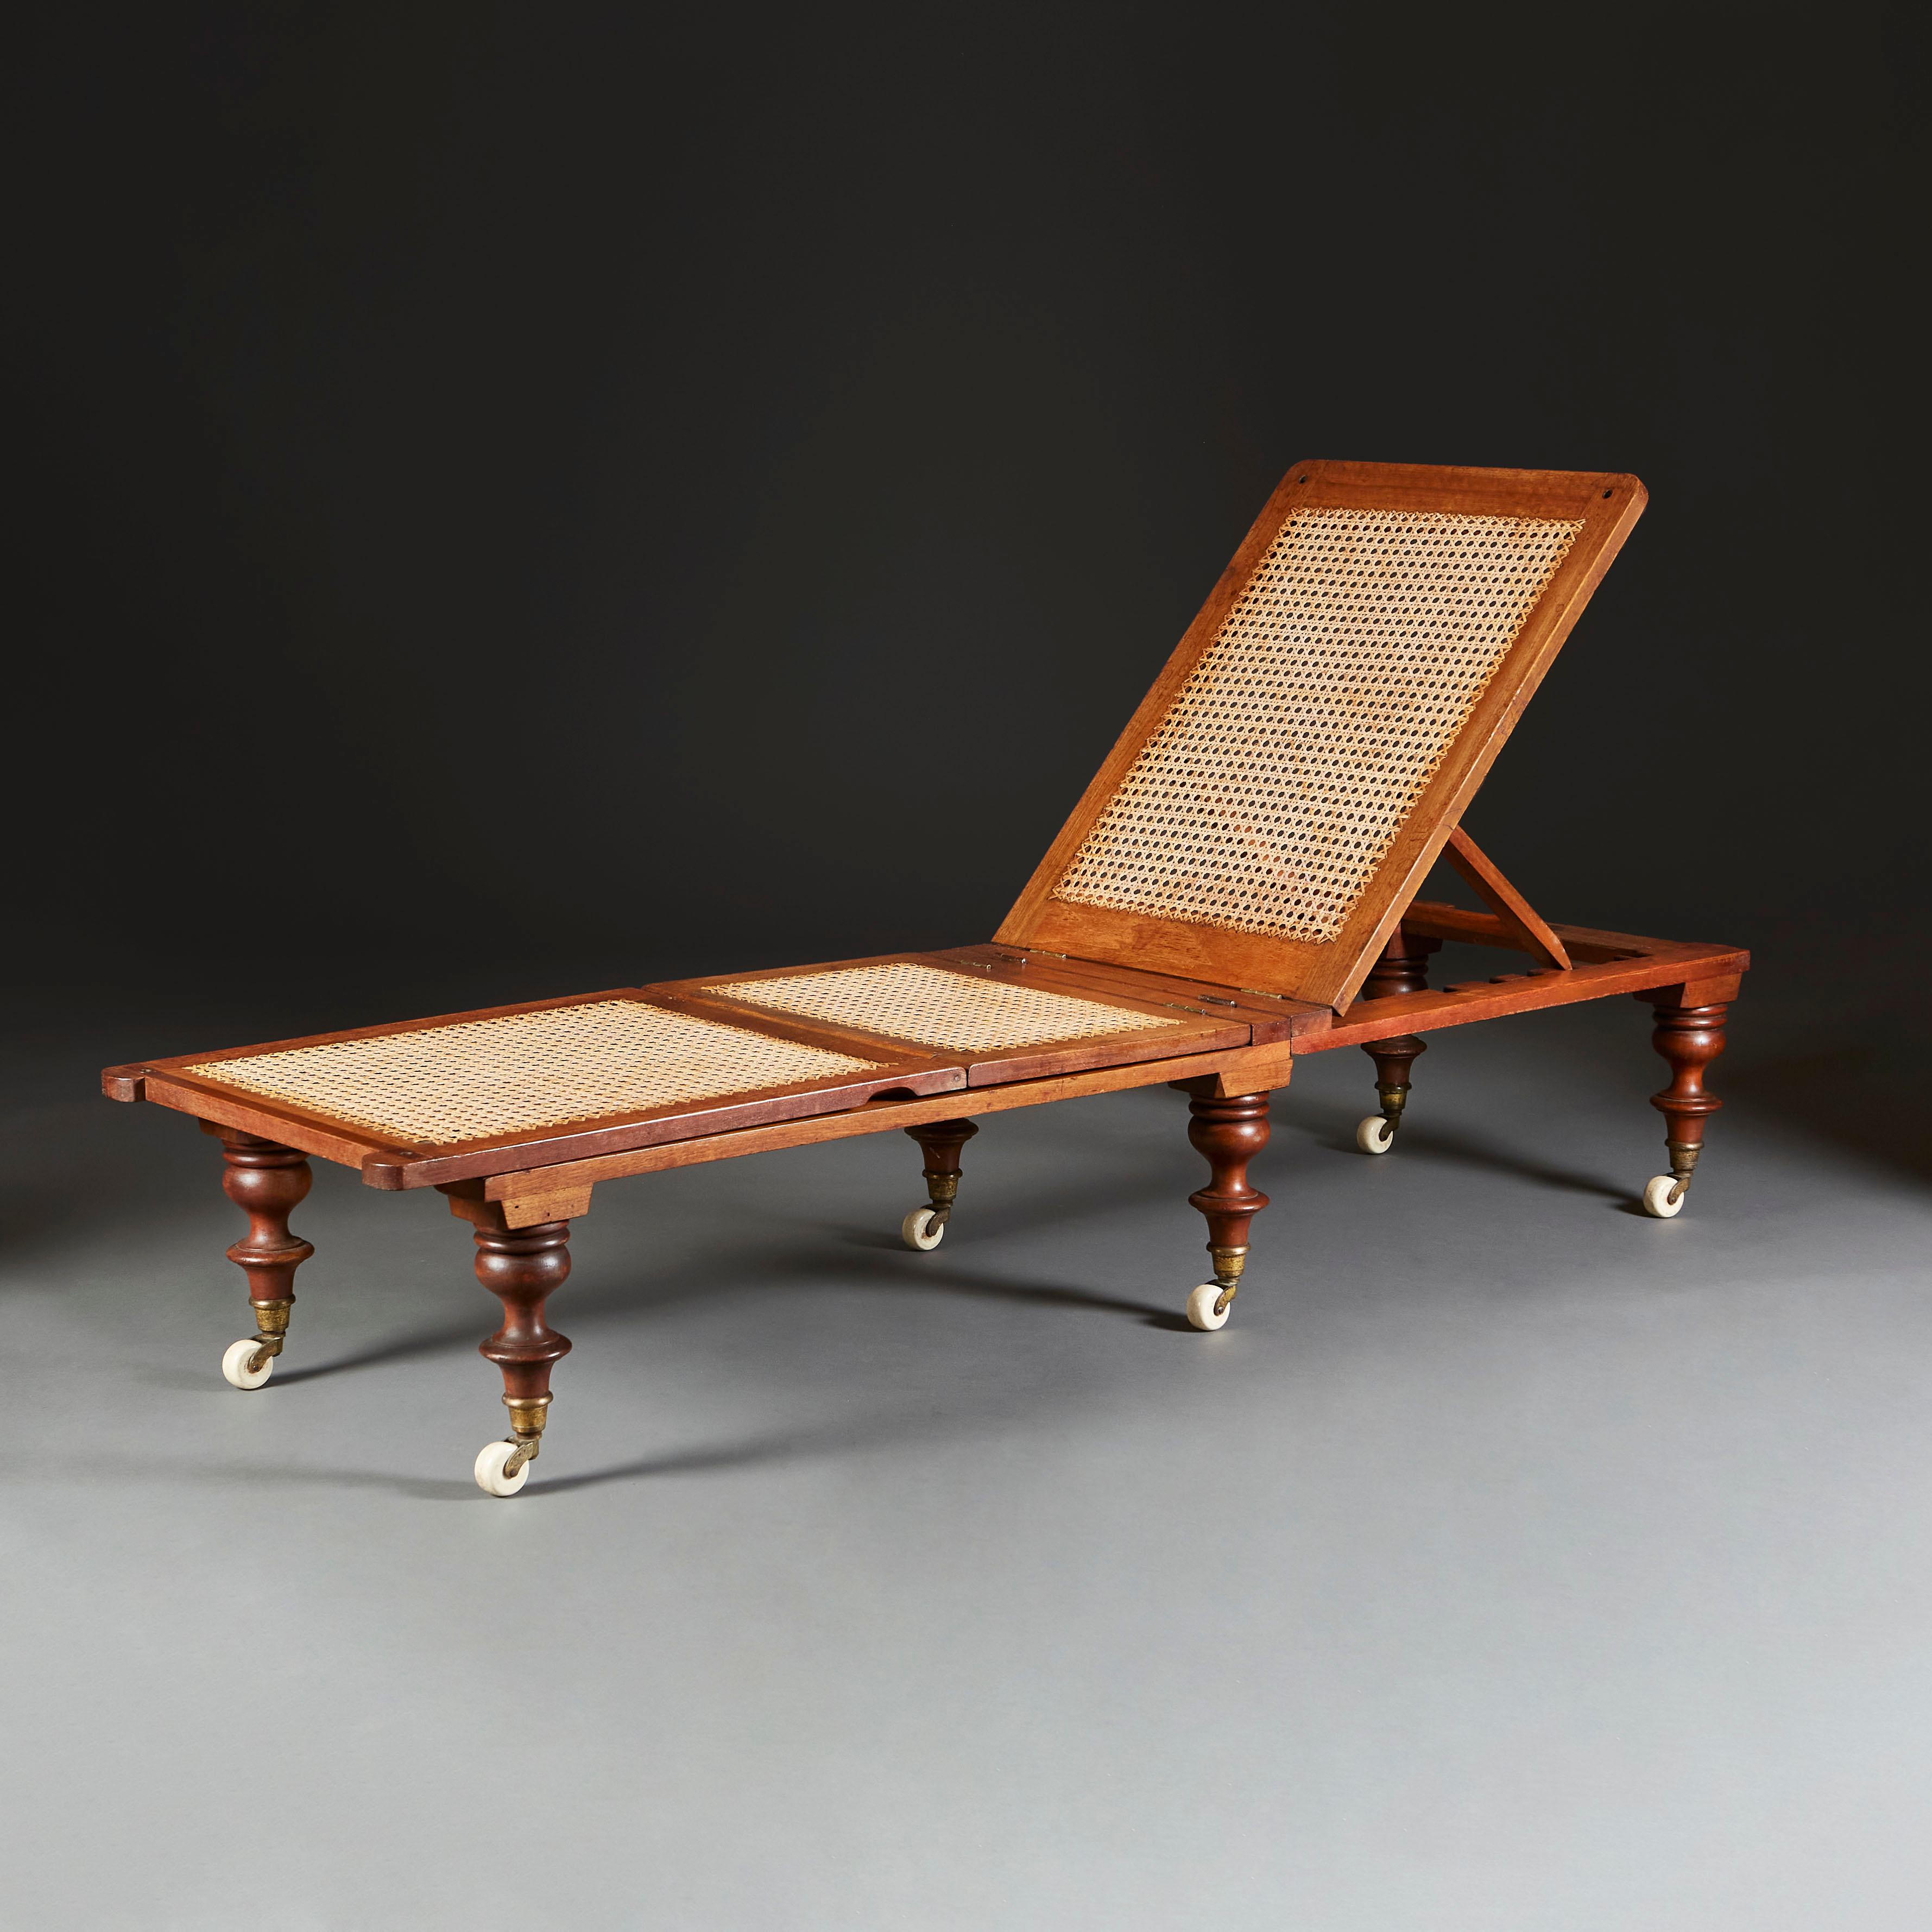 An unusual late nineteenth century mahogany day bed of articulated form, with adjustable back and leg splats, with caned seat, now with contemporary upholstered red and white striped cushions, all supported on turned legs with porcelain castors.